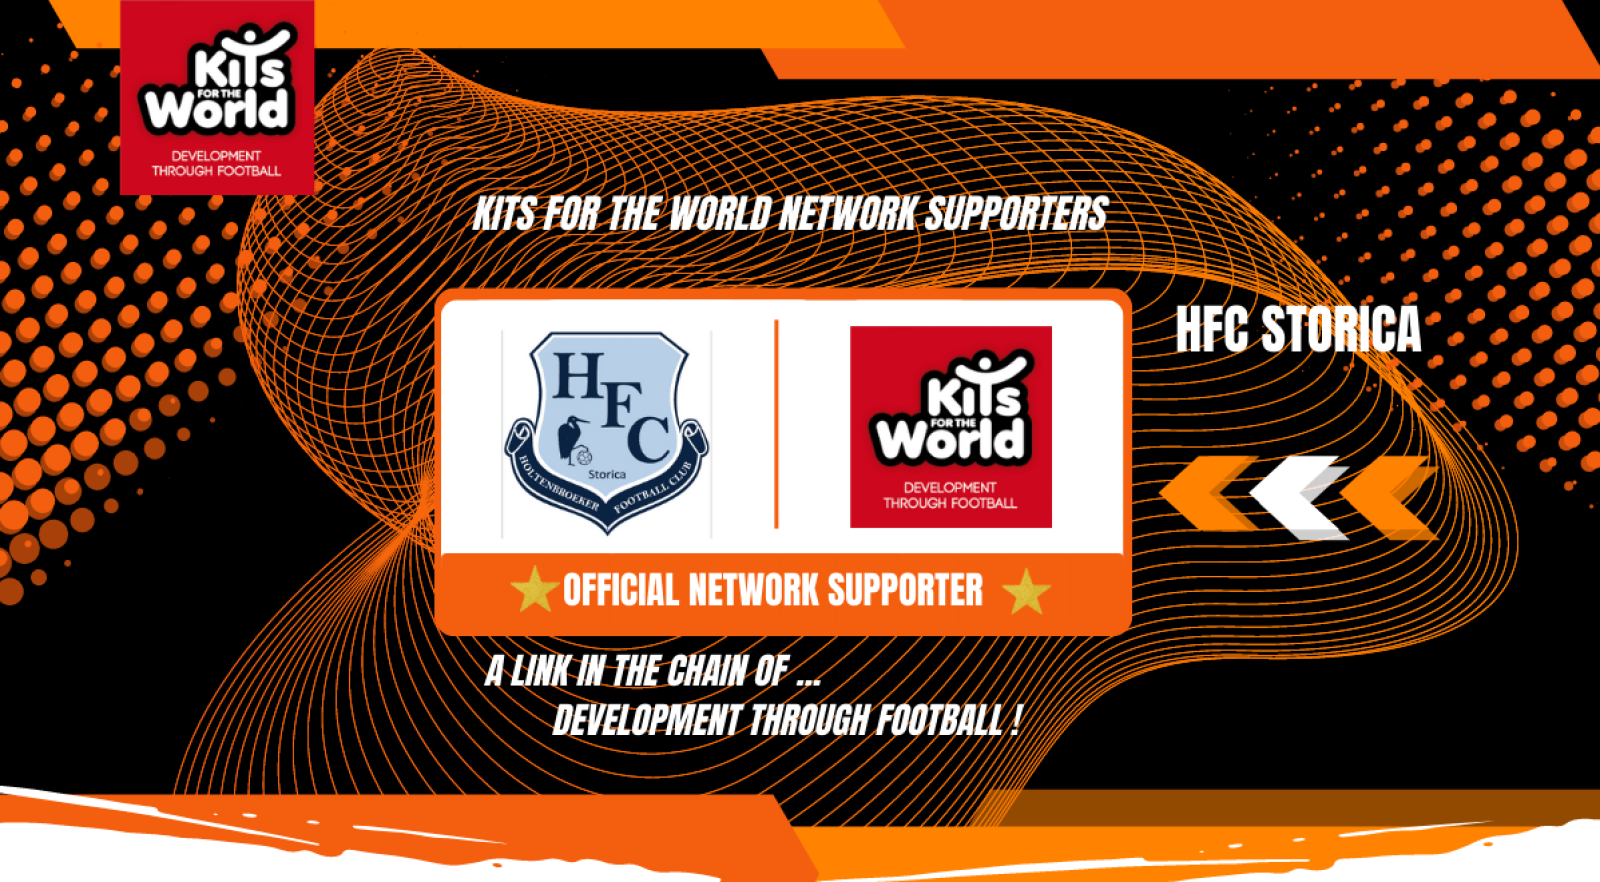 HFC STORICA_official NETWORK SUPPORTER _Kits for the World